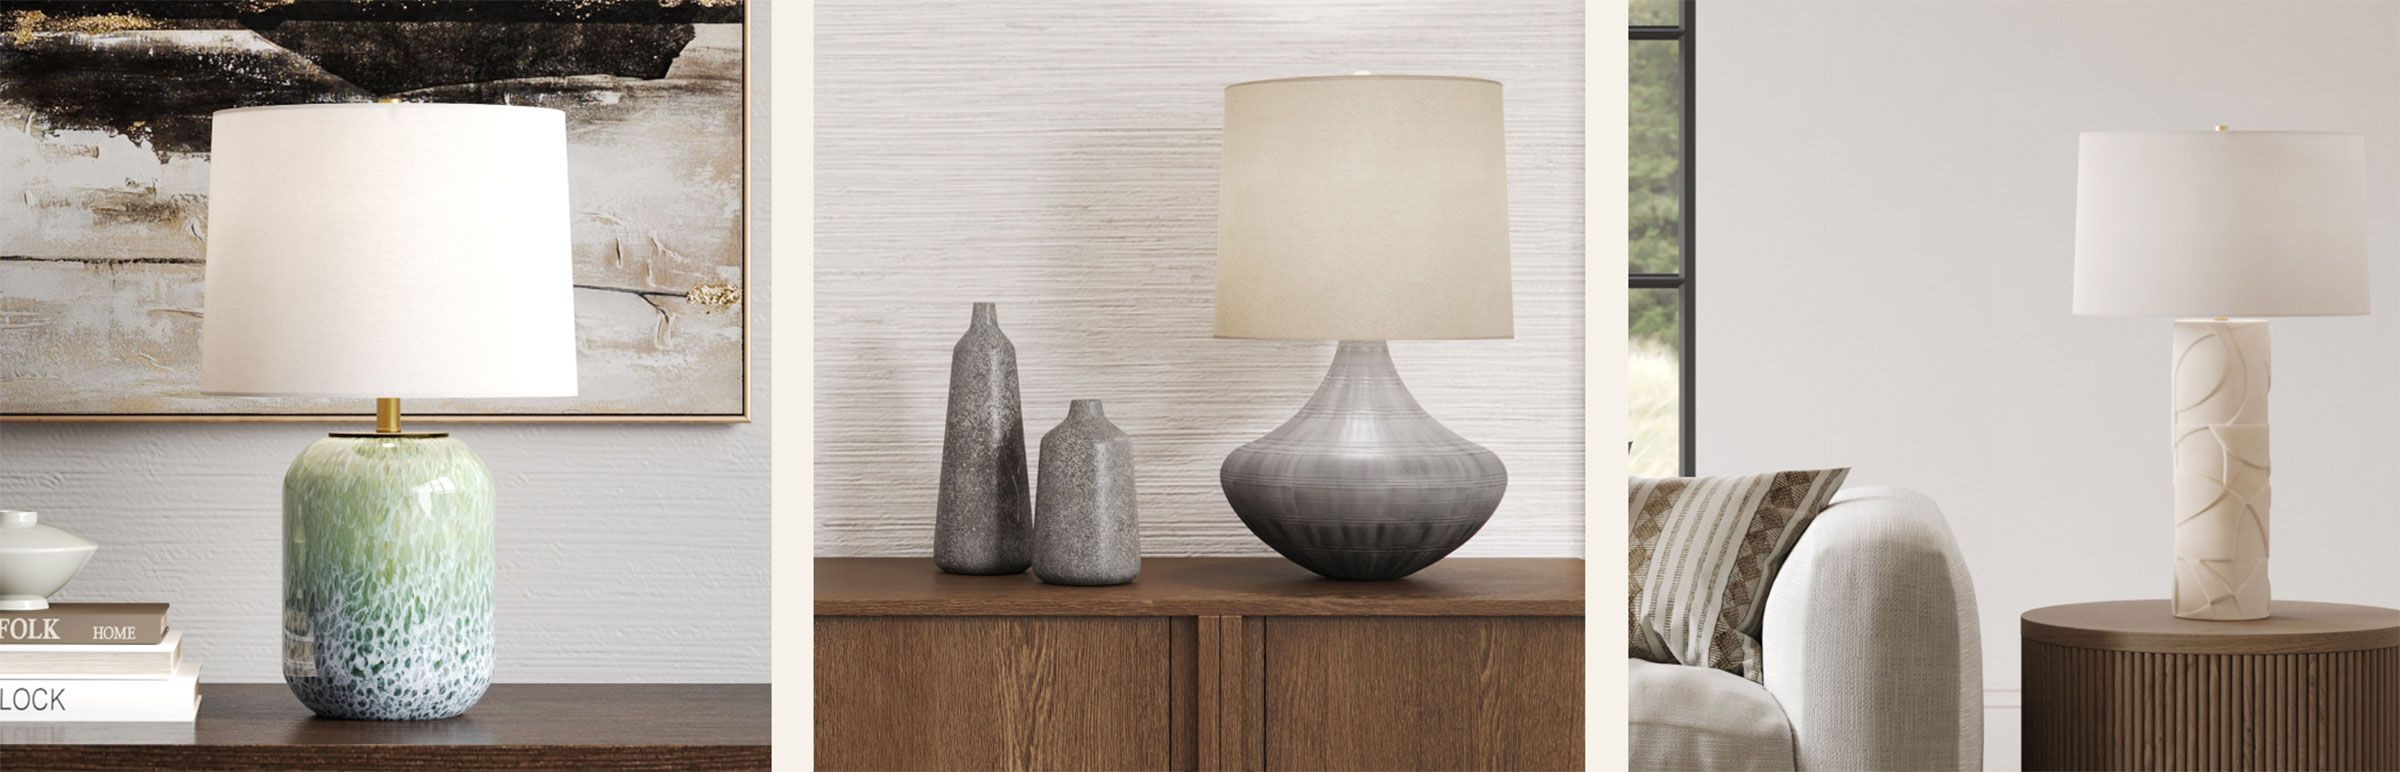 3 images of different table lamps